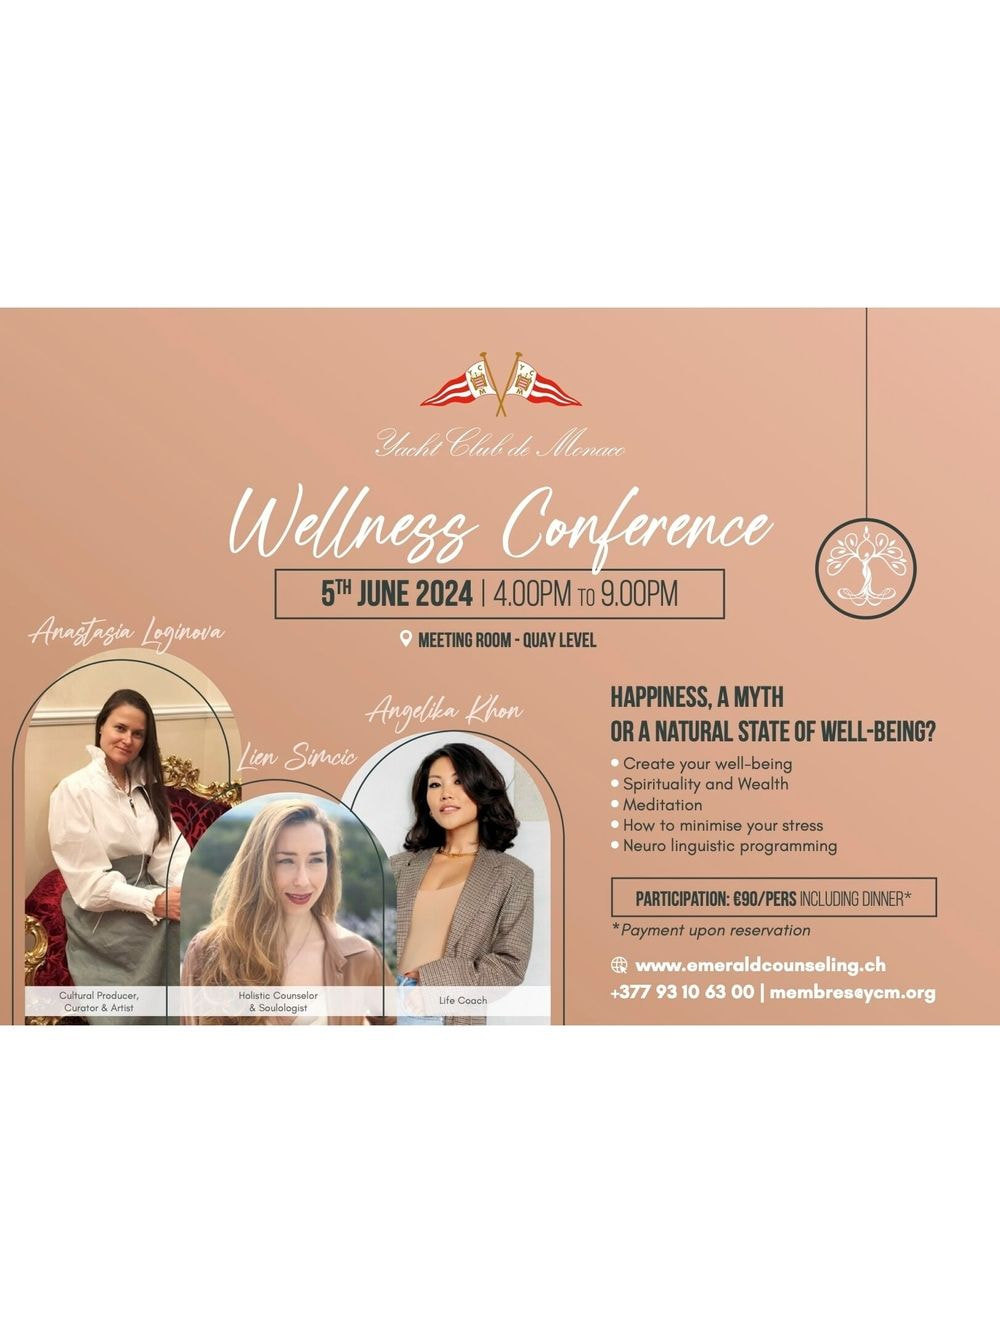 Wellness Conference